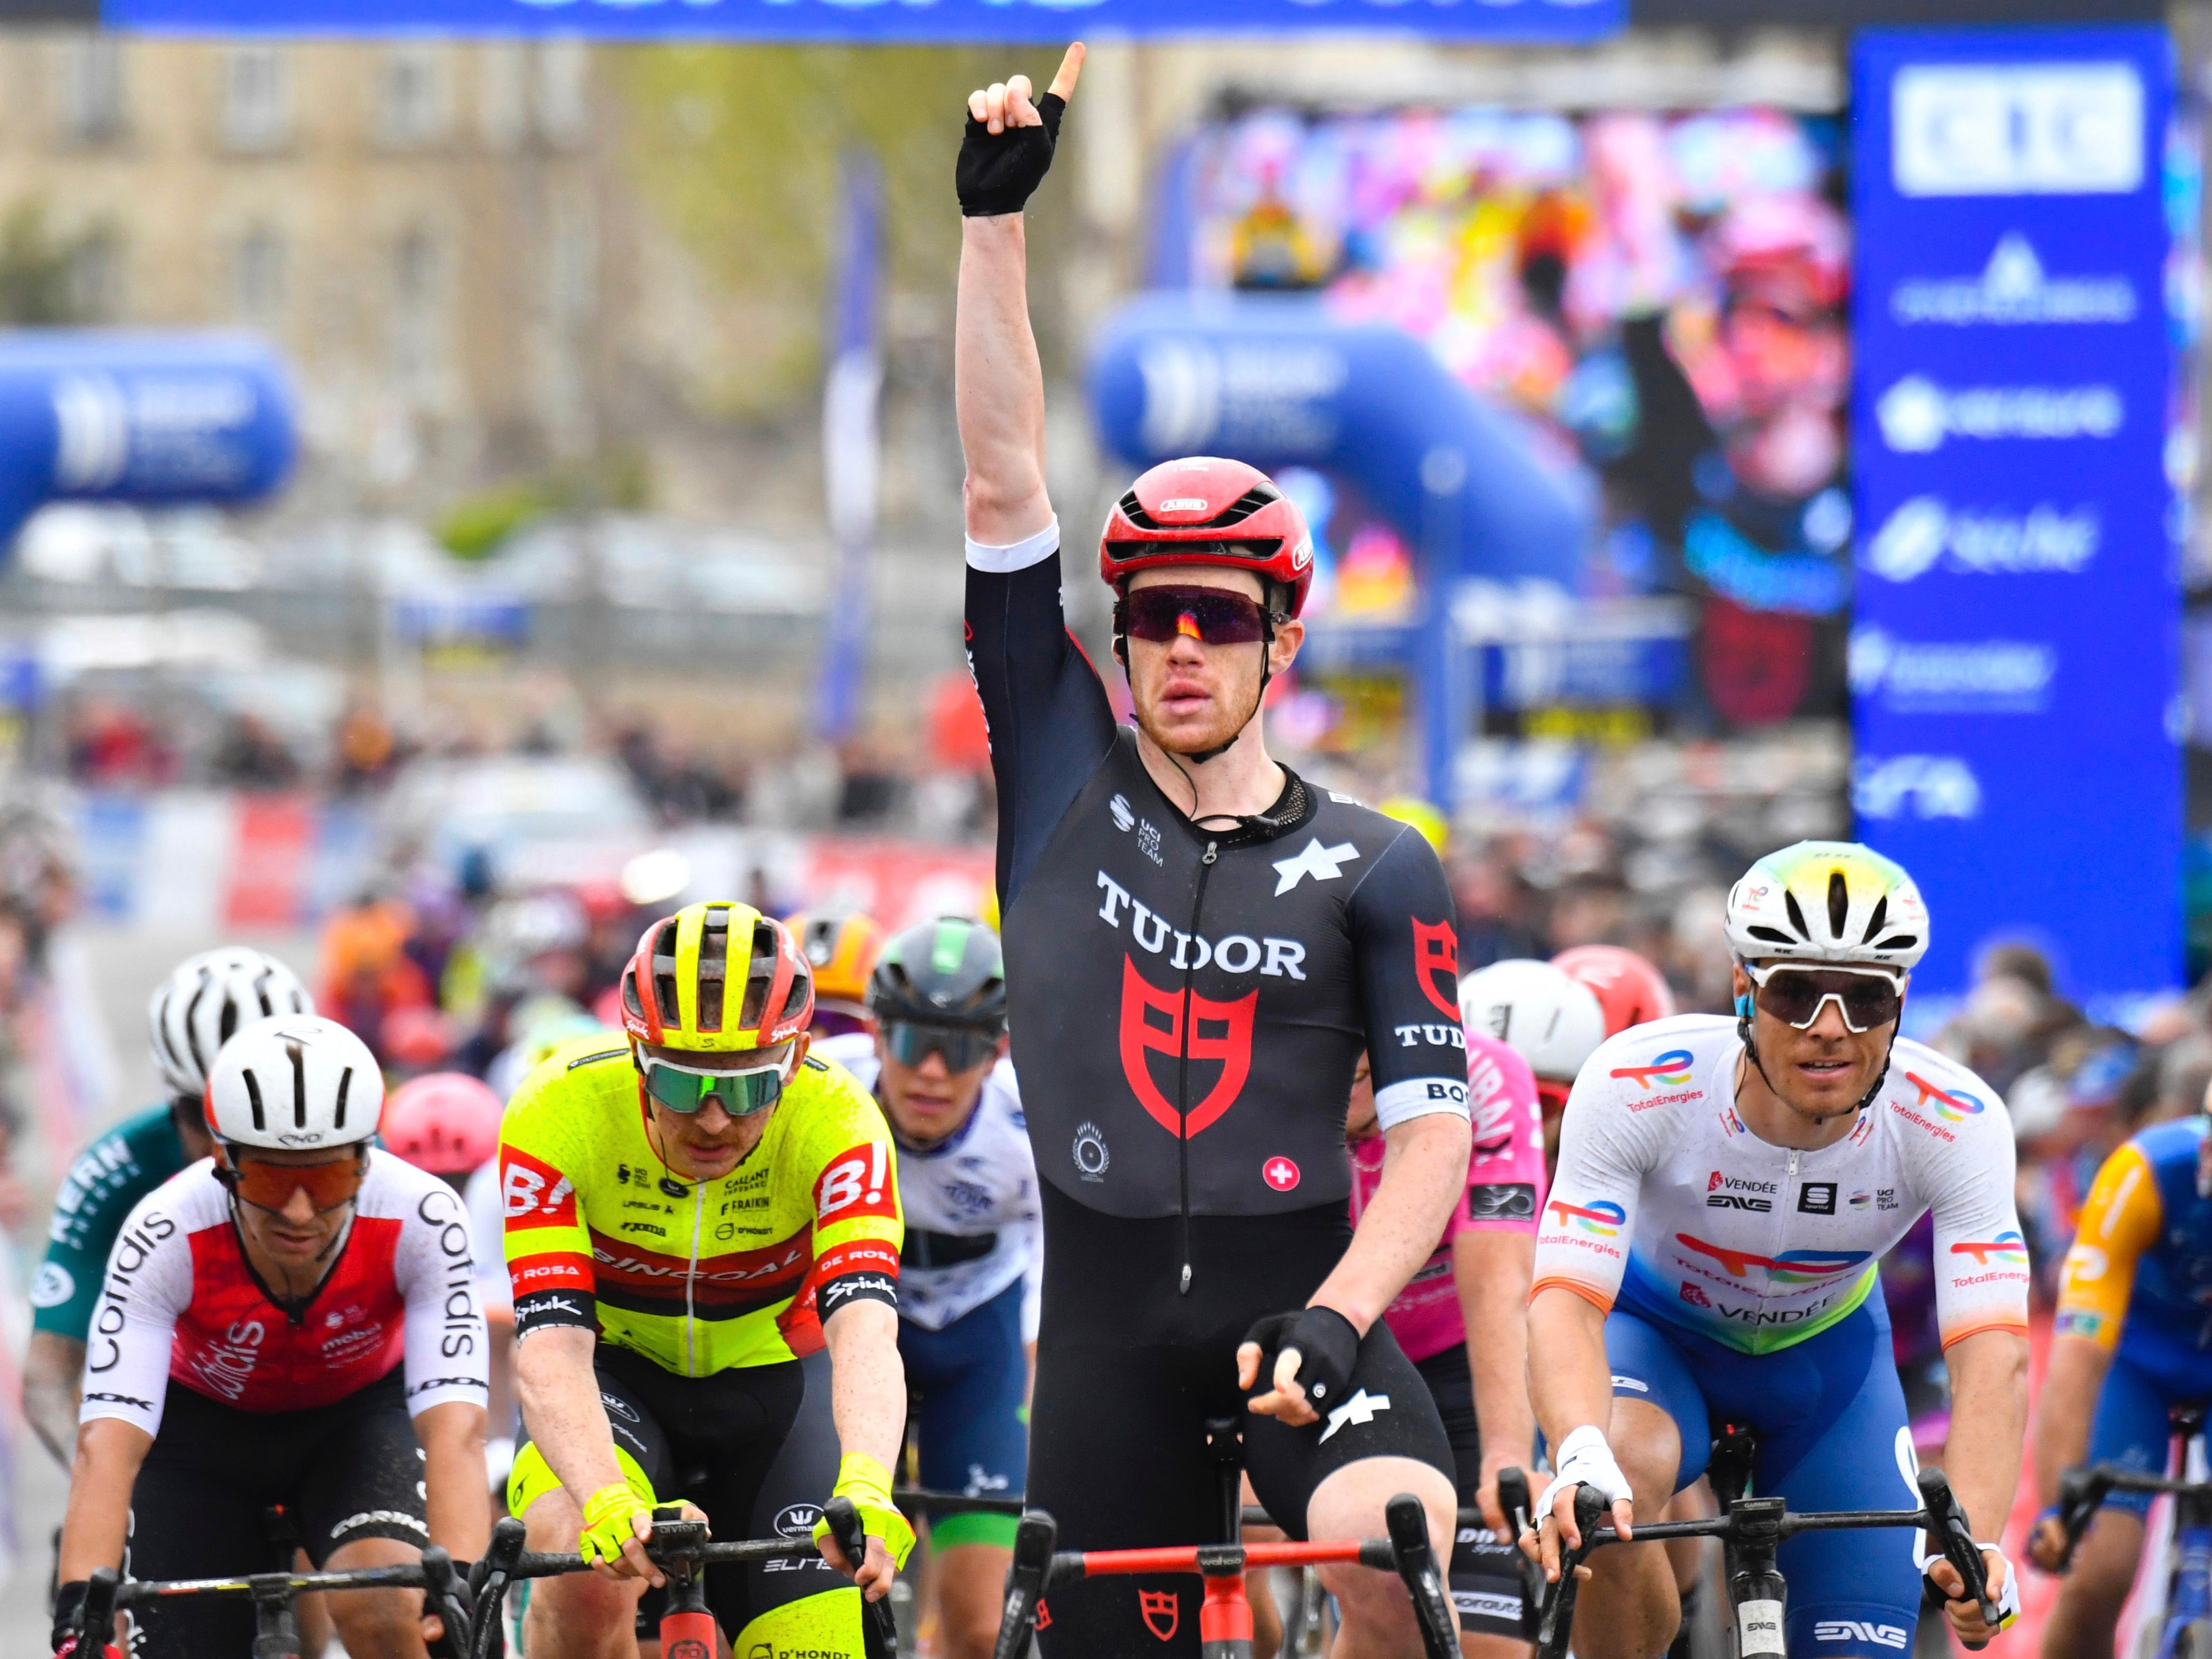 Tudor Pro Cycling's Dainese secures his first victory of the season